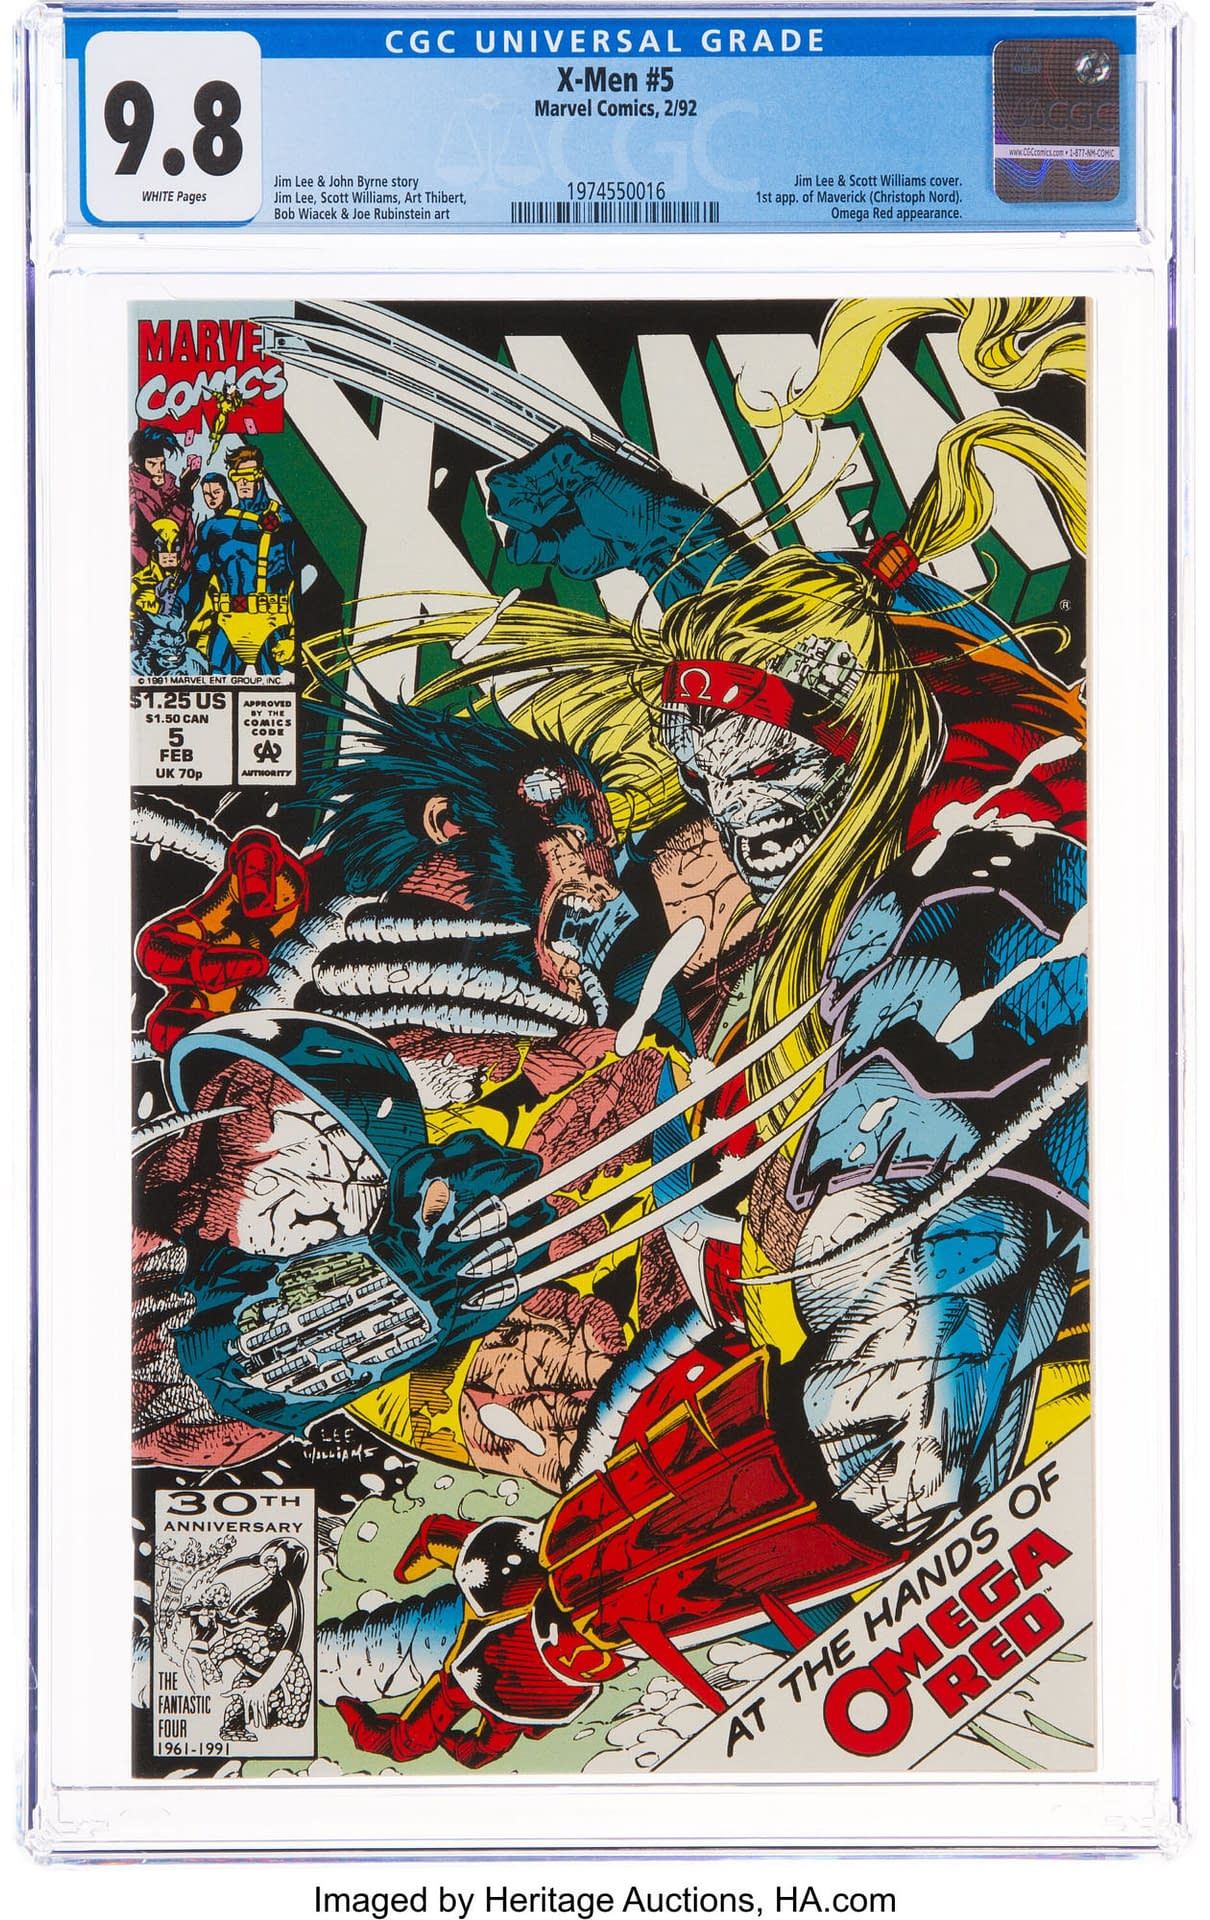 Omega Red Debuts In Auctions Taking Bids At Heritage Auctions